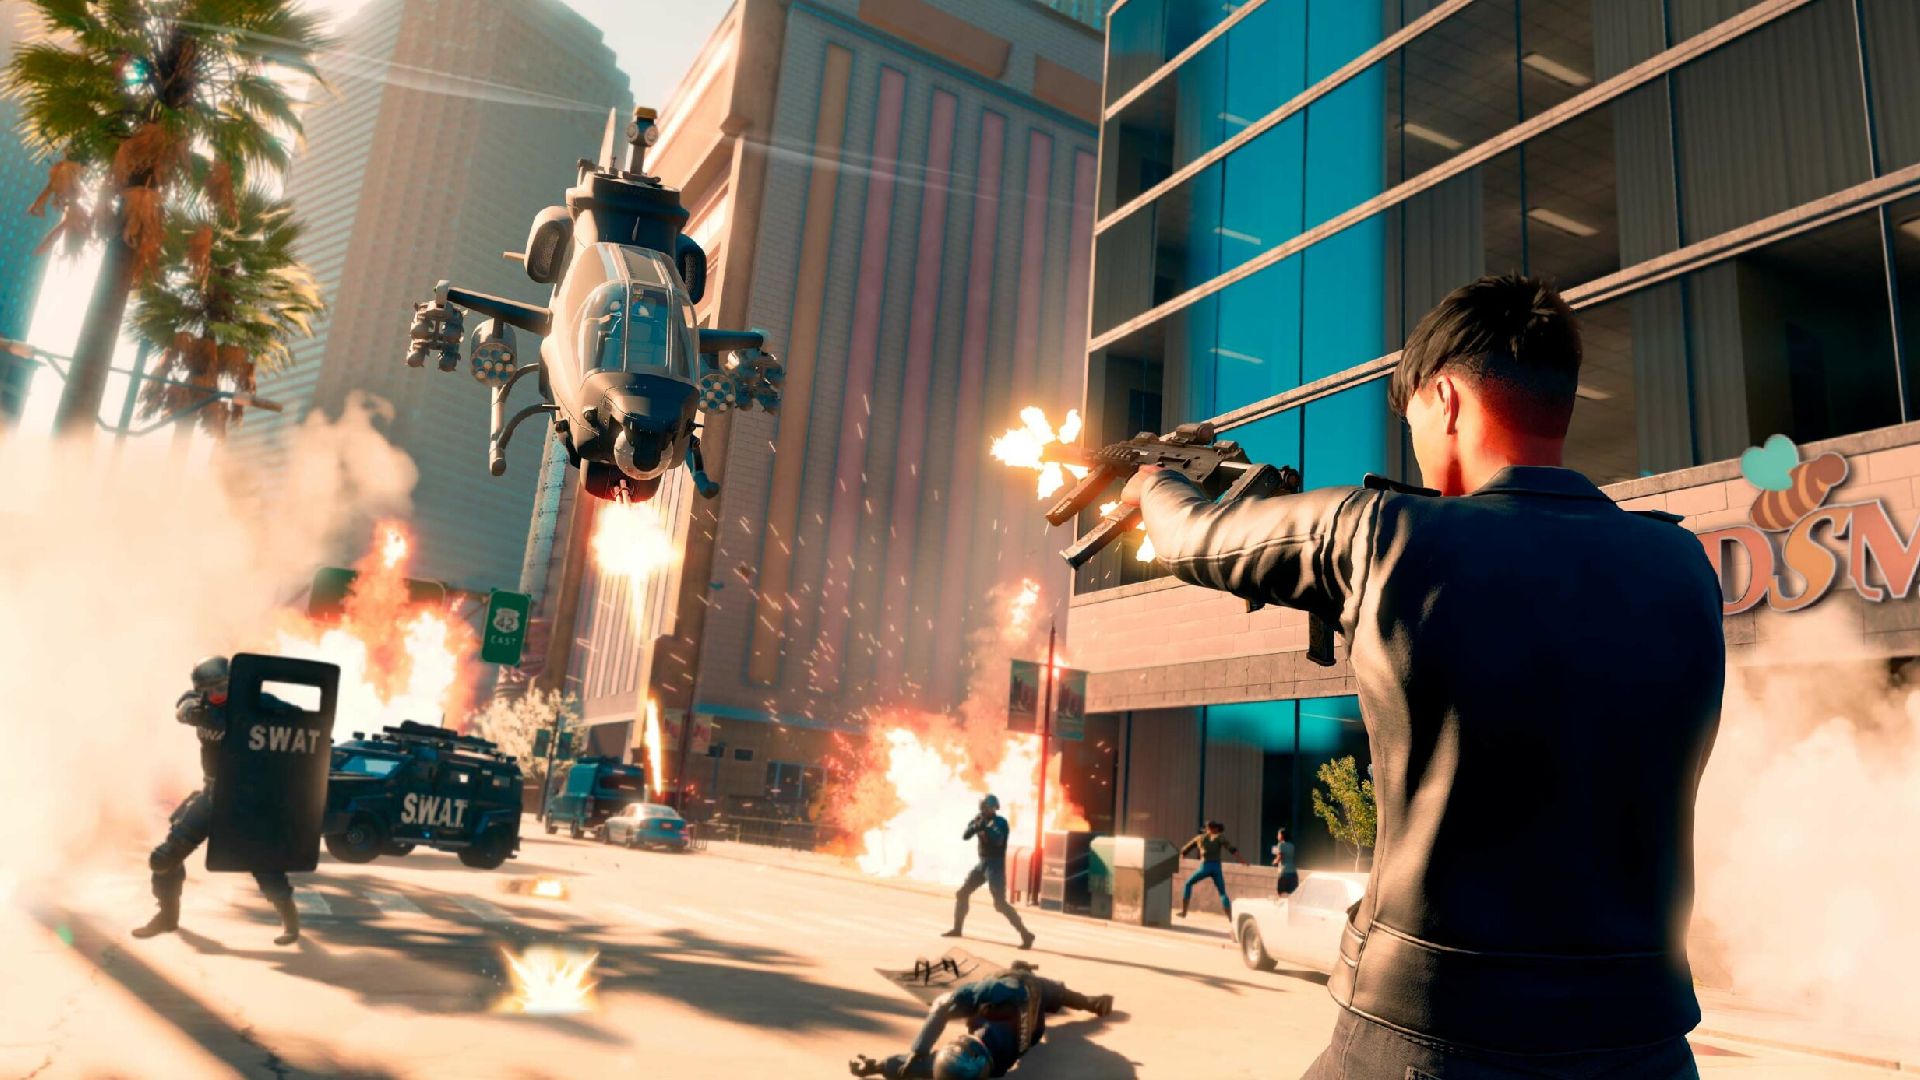 Saints Row Walkthrough: The Boss can be seen shooting a helicopter